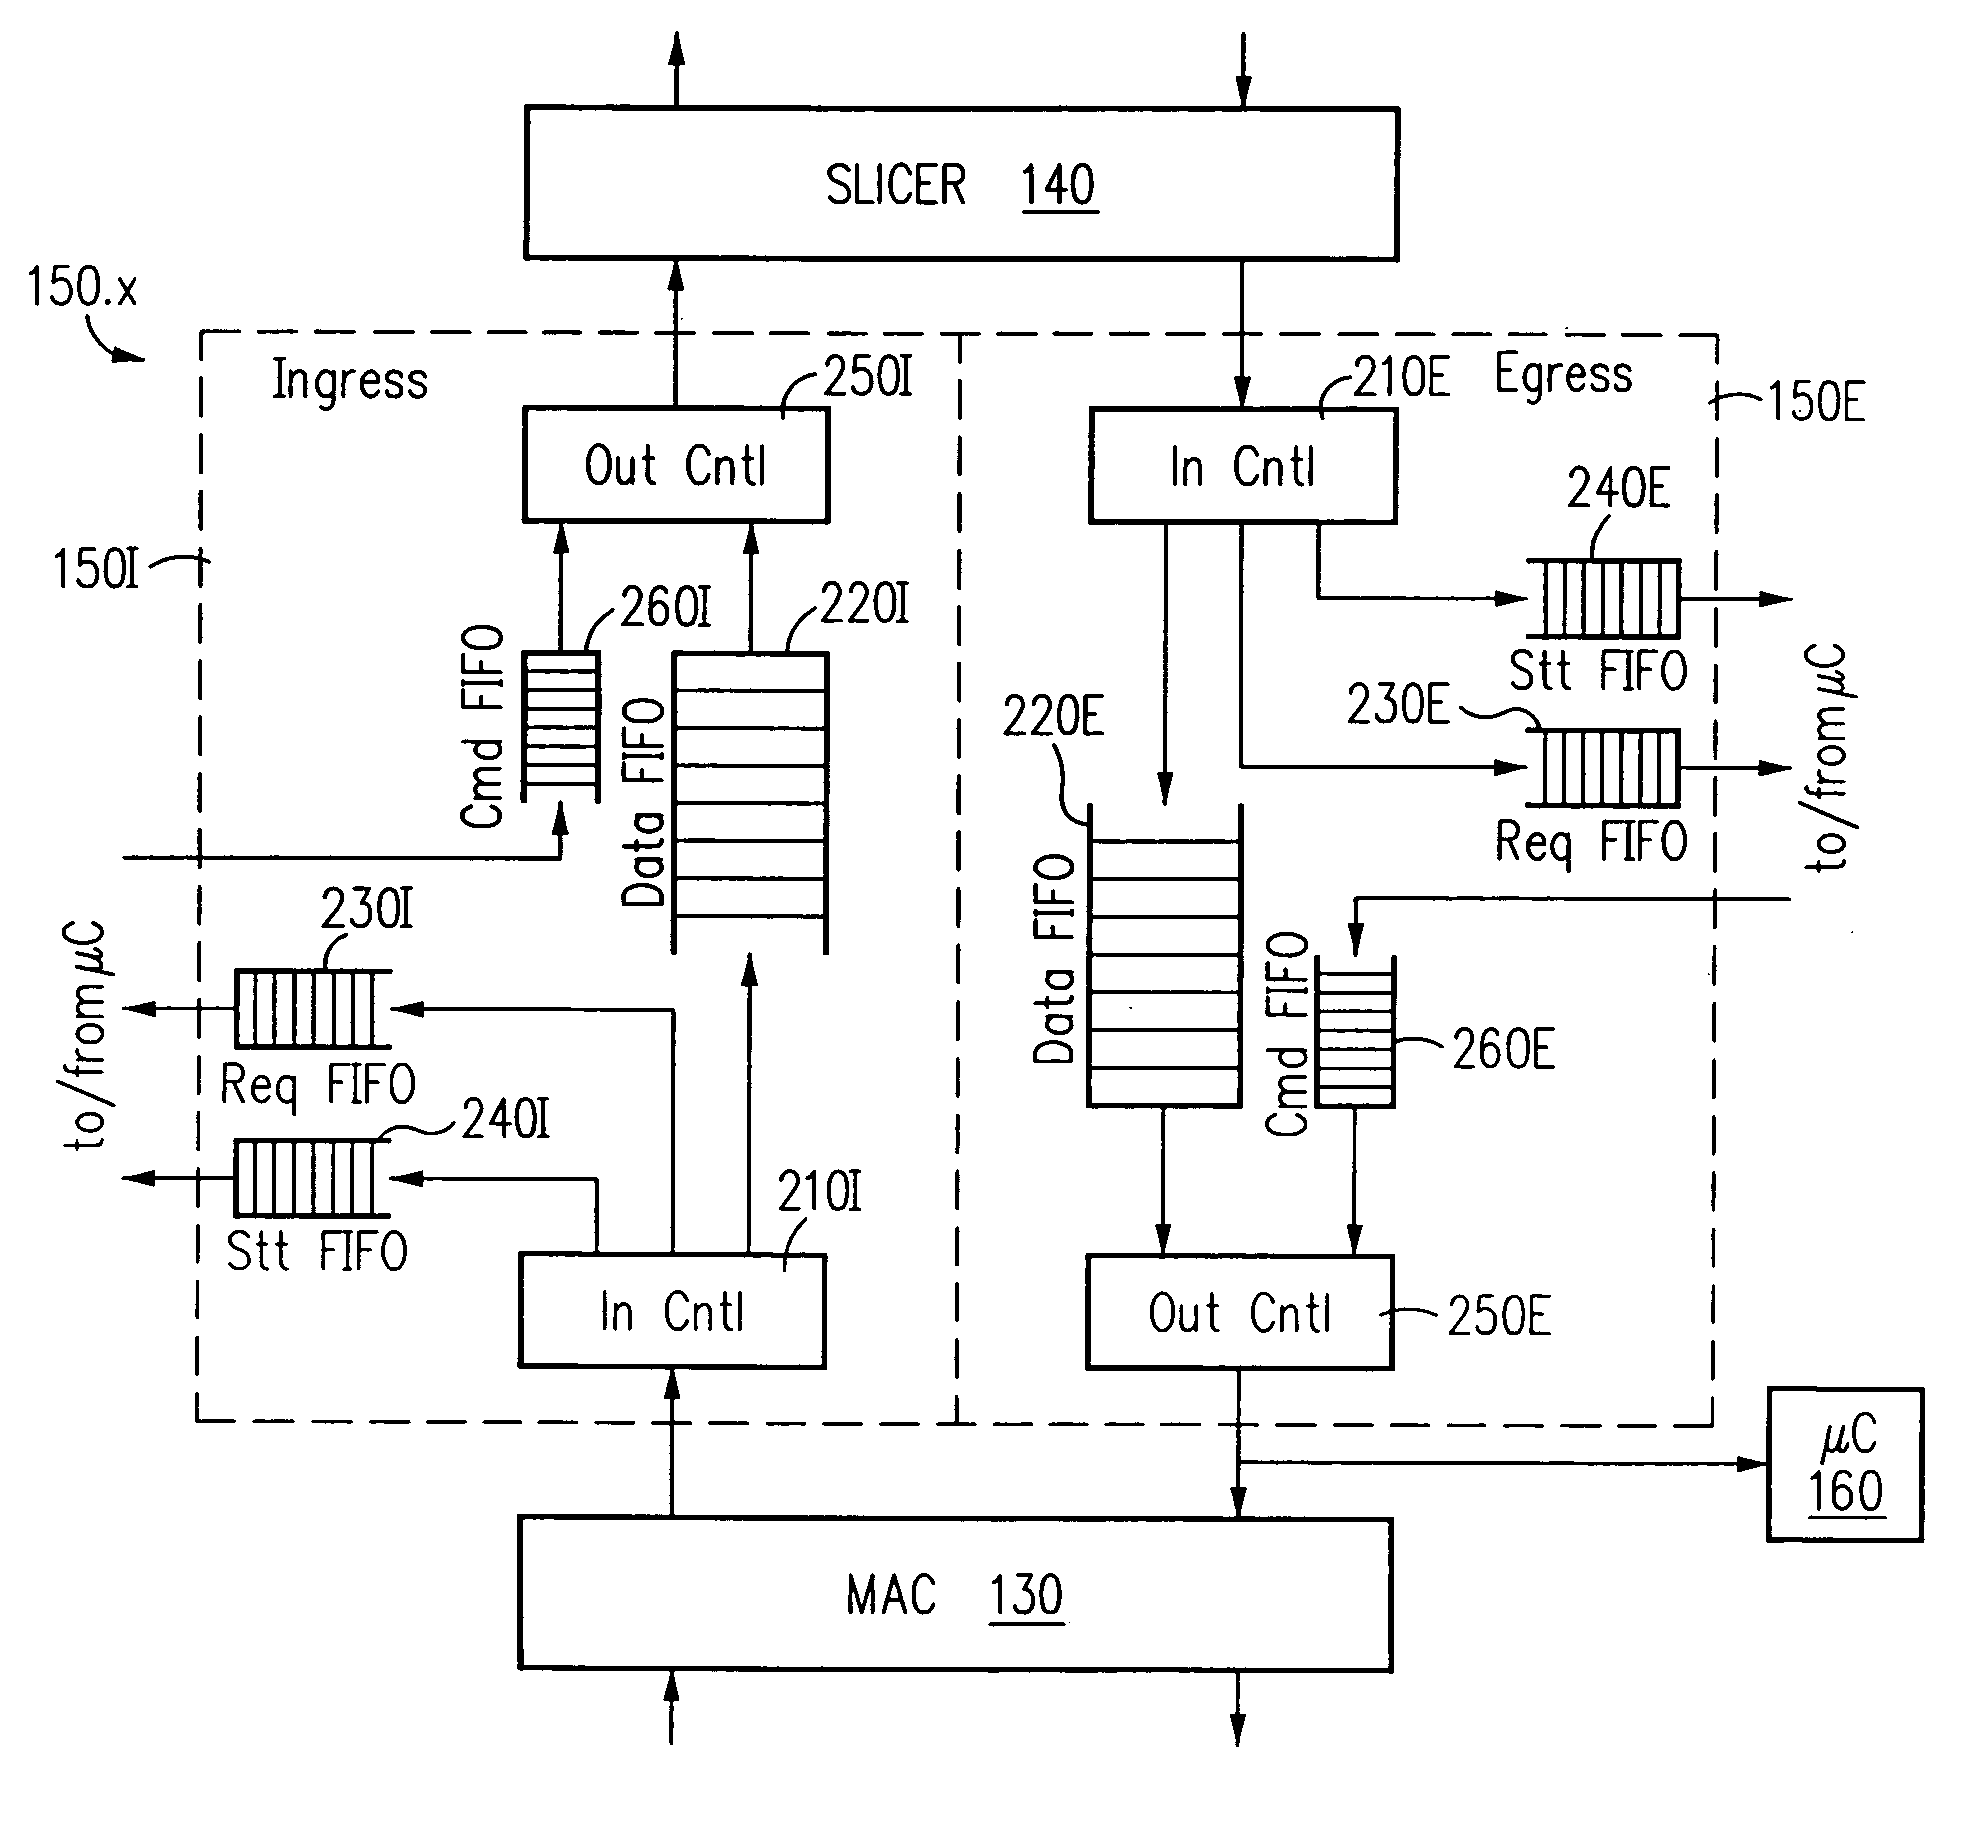 Systems and methods for multi-tasking, resource sharing and execution of computer instructions